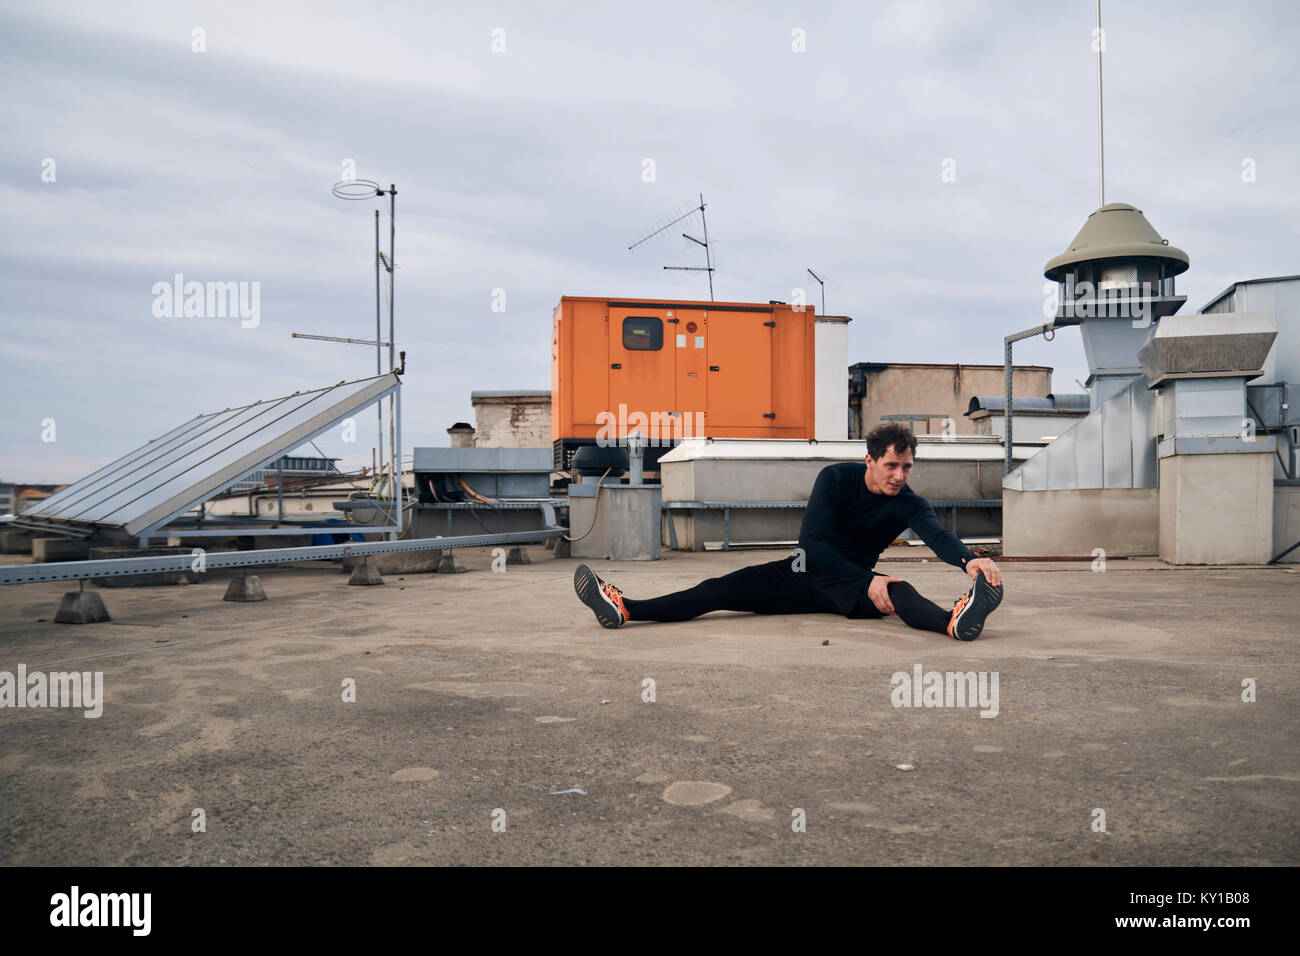 one young man stretching outdoors on rooftop of building. Heating, ventilation, and air conditioning systems. Stock Photo